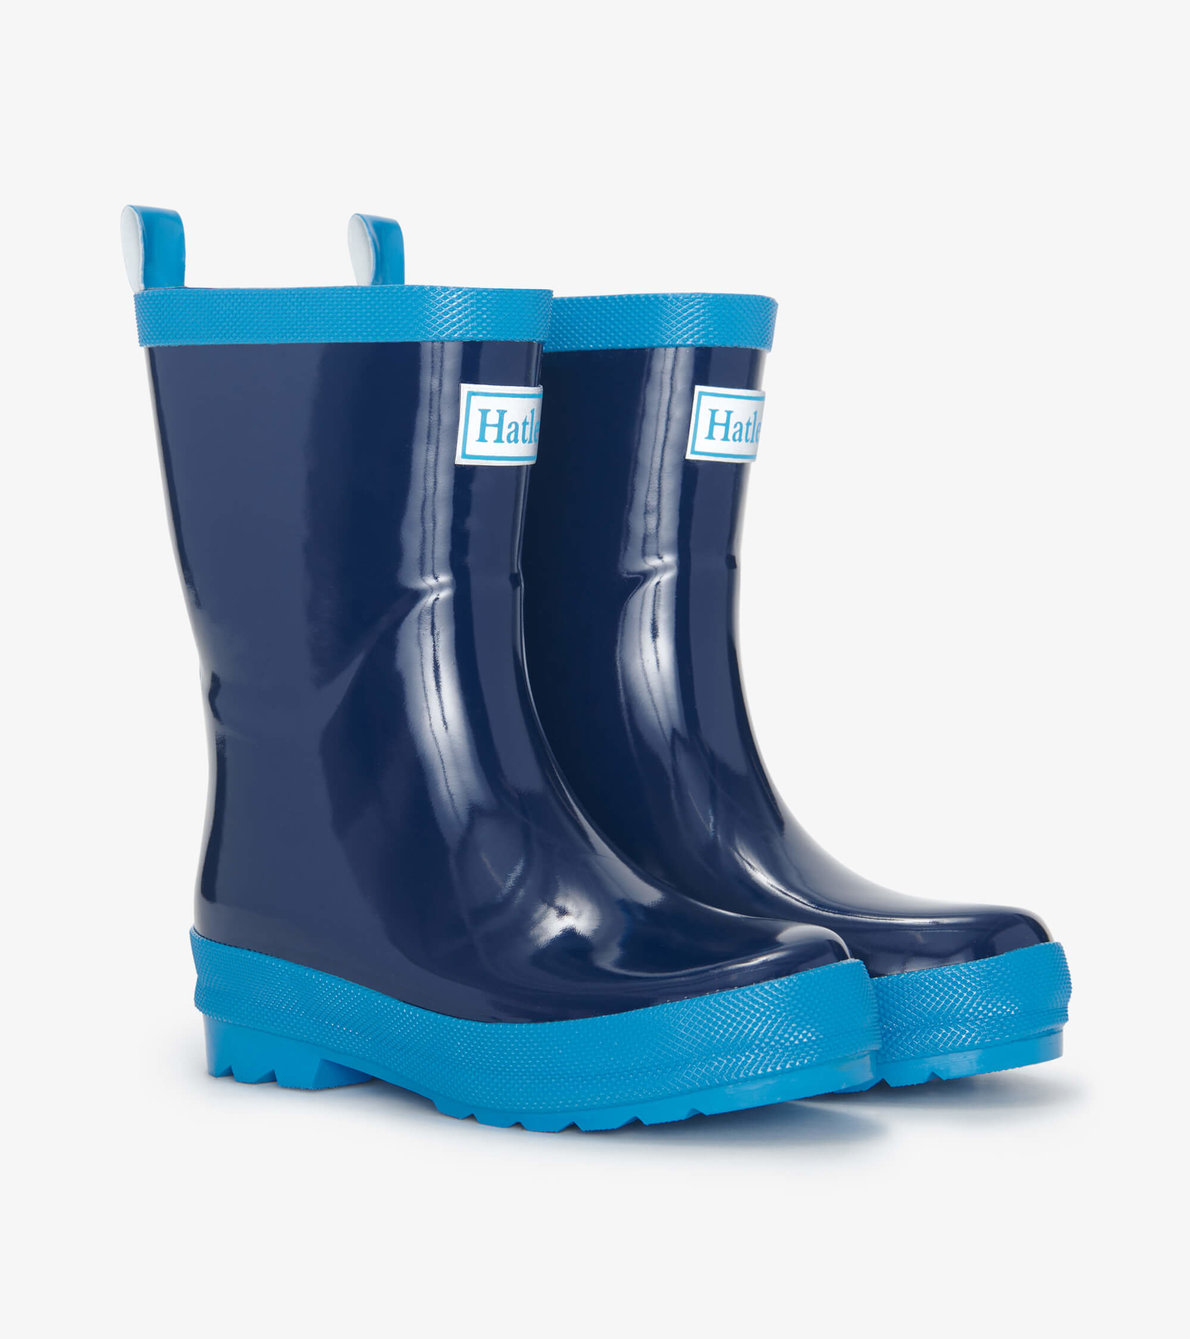 View larger image of Navy Shiny Rain Boots